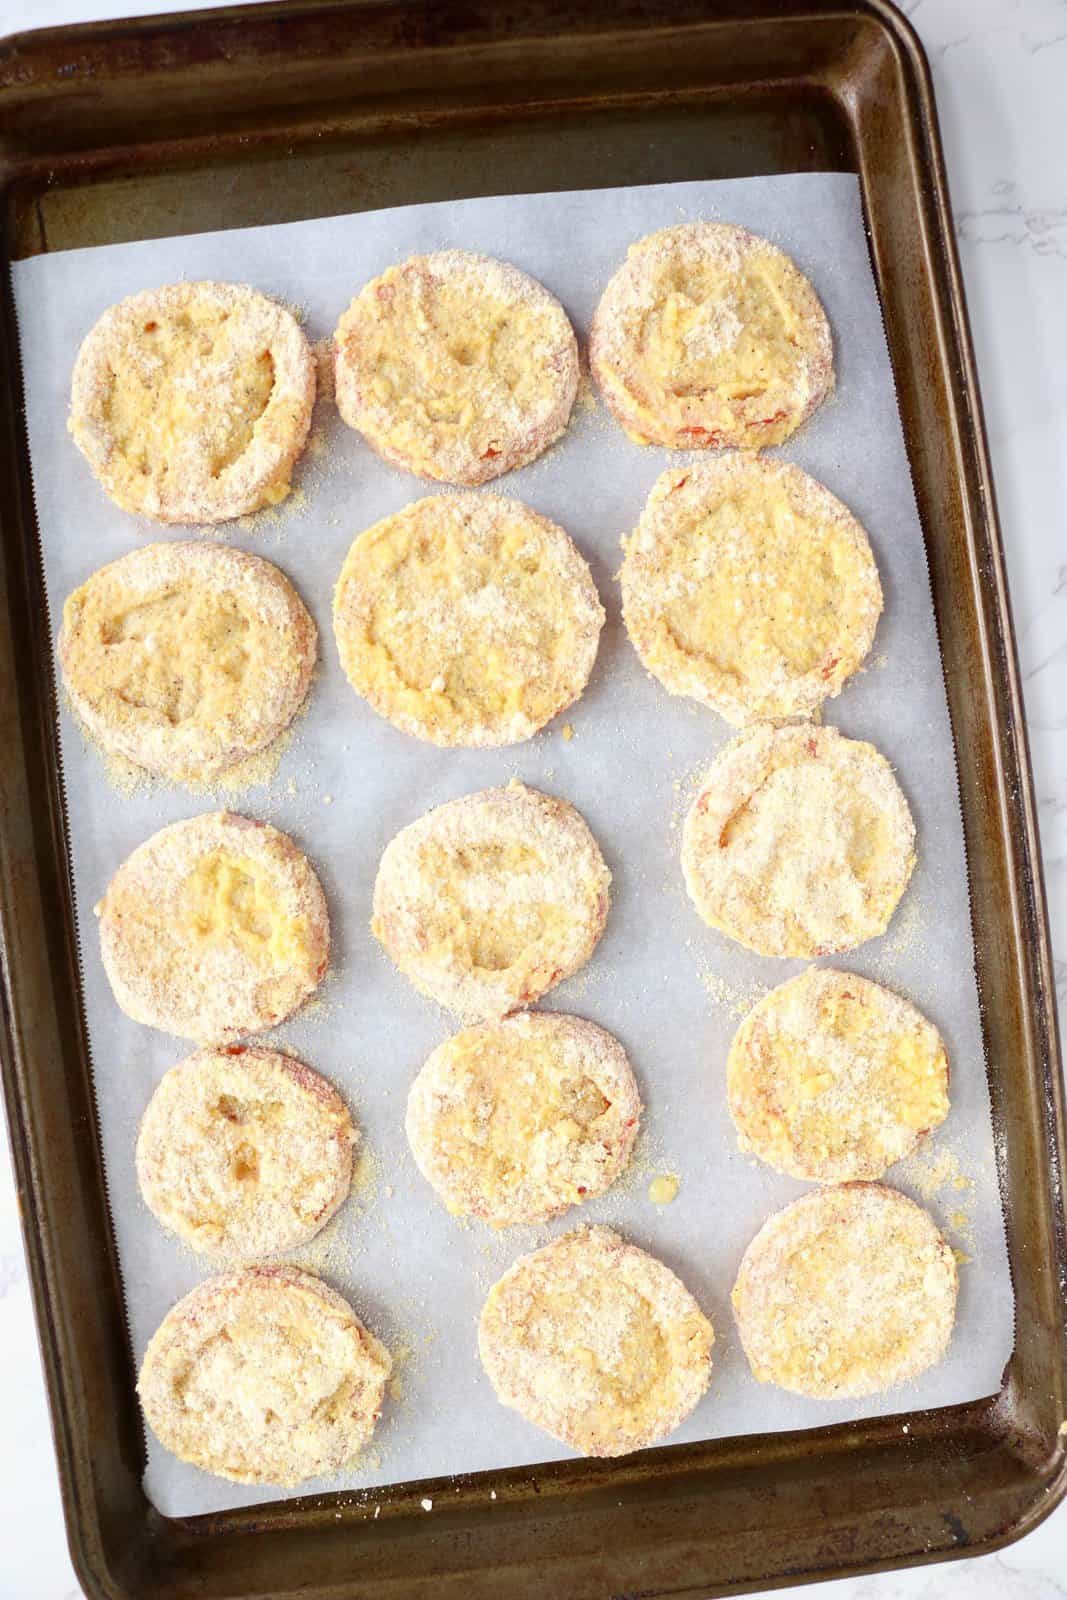 A baking sheet lined with parchment paper and breaded tomatoes on top.